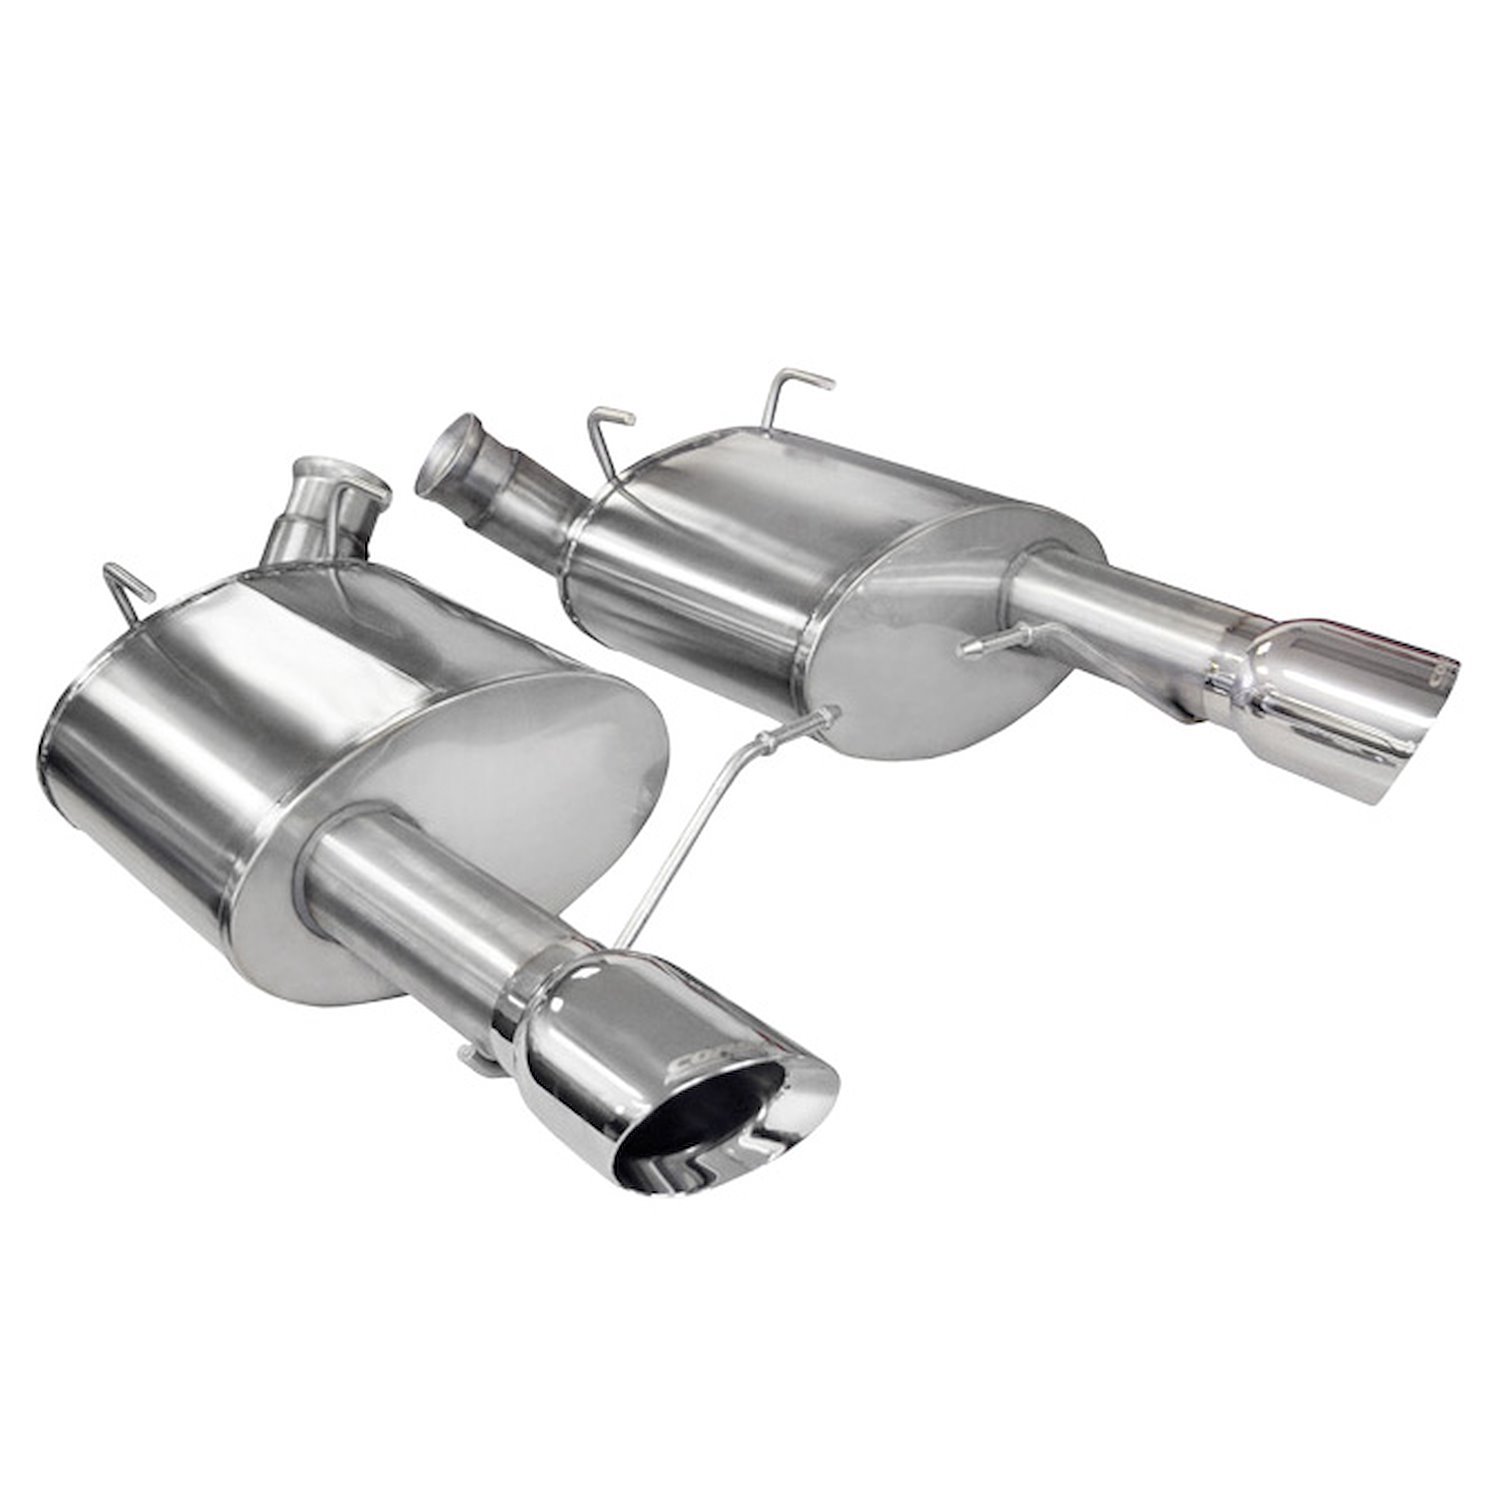 Sport Axle-Back Exhaust System 2011-2014 Ford Mustang GT, 2011-2013 Boss 302 5.0L